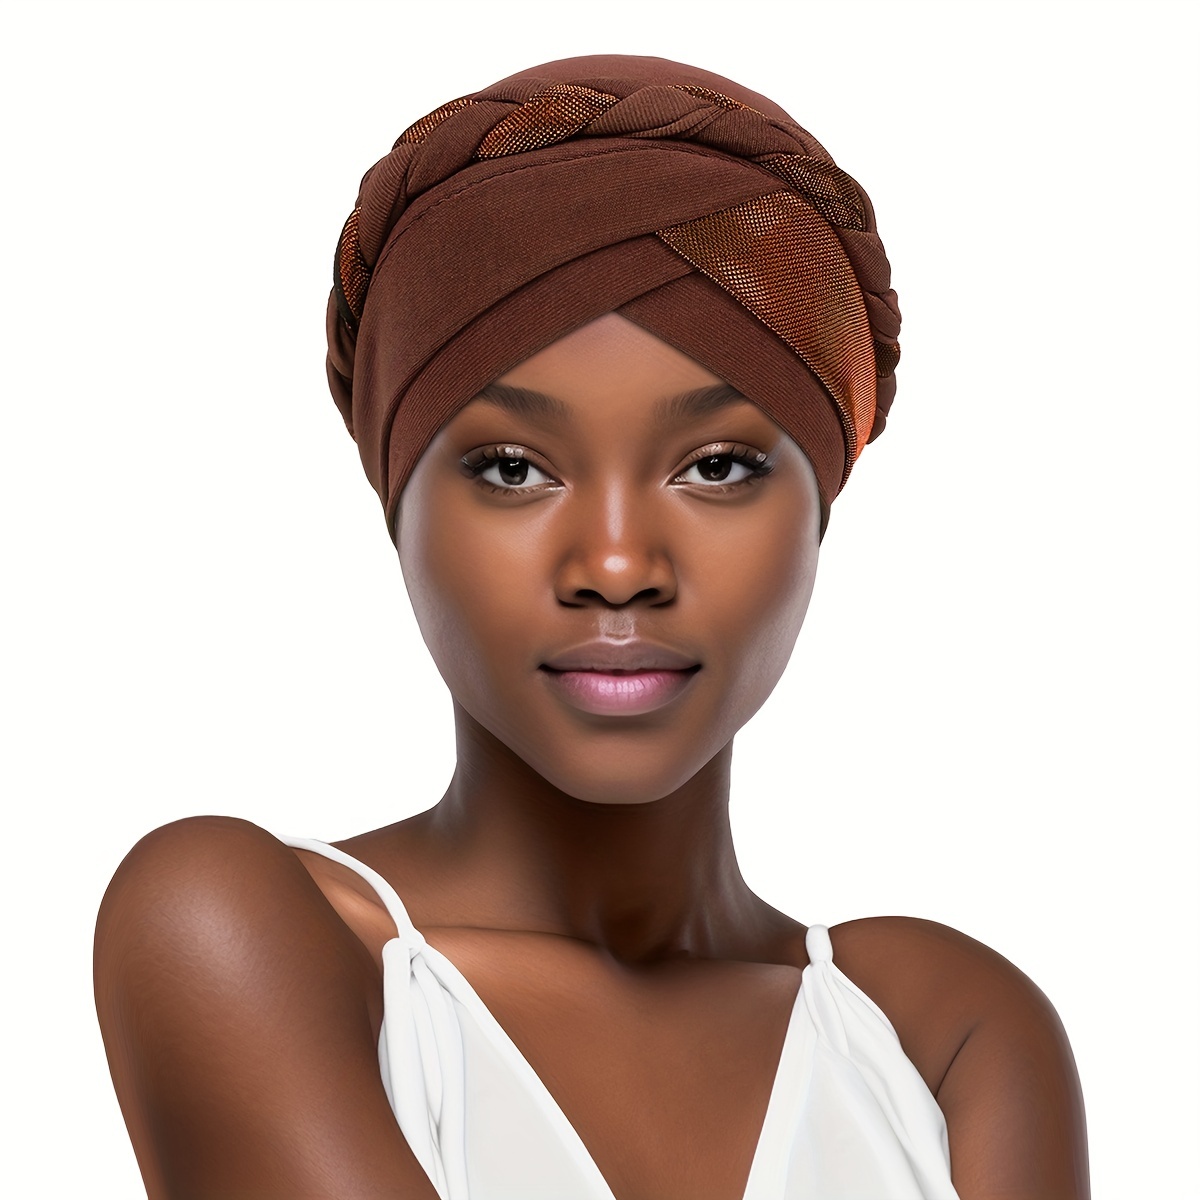 

Classic Braided Laser Turban Cap Solid Color Forehead Cross Head Wrap Hijab Elastic Bonnet Chemo Hats For Women